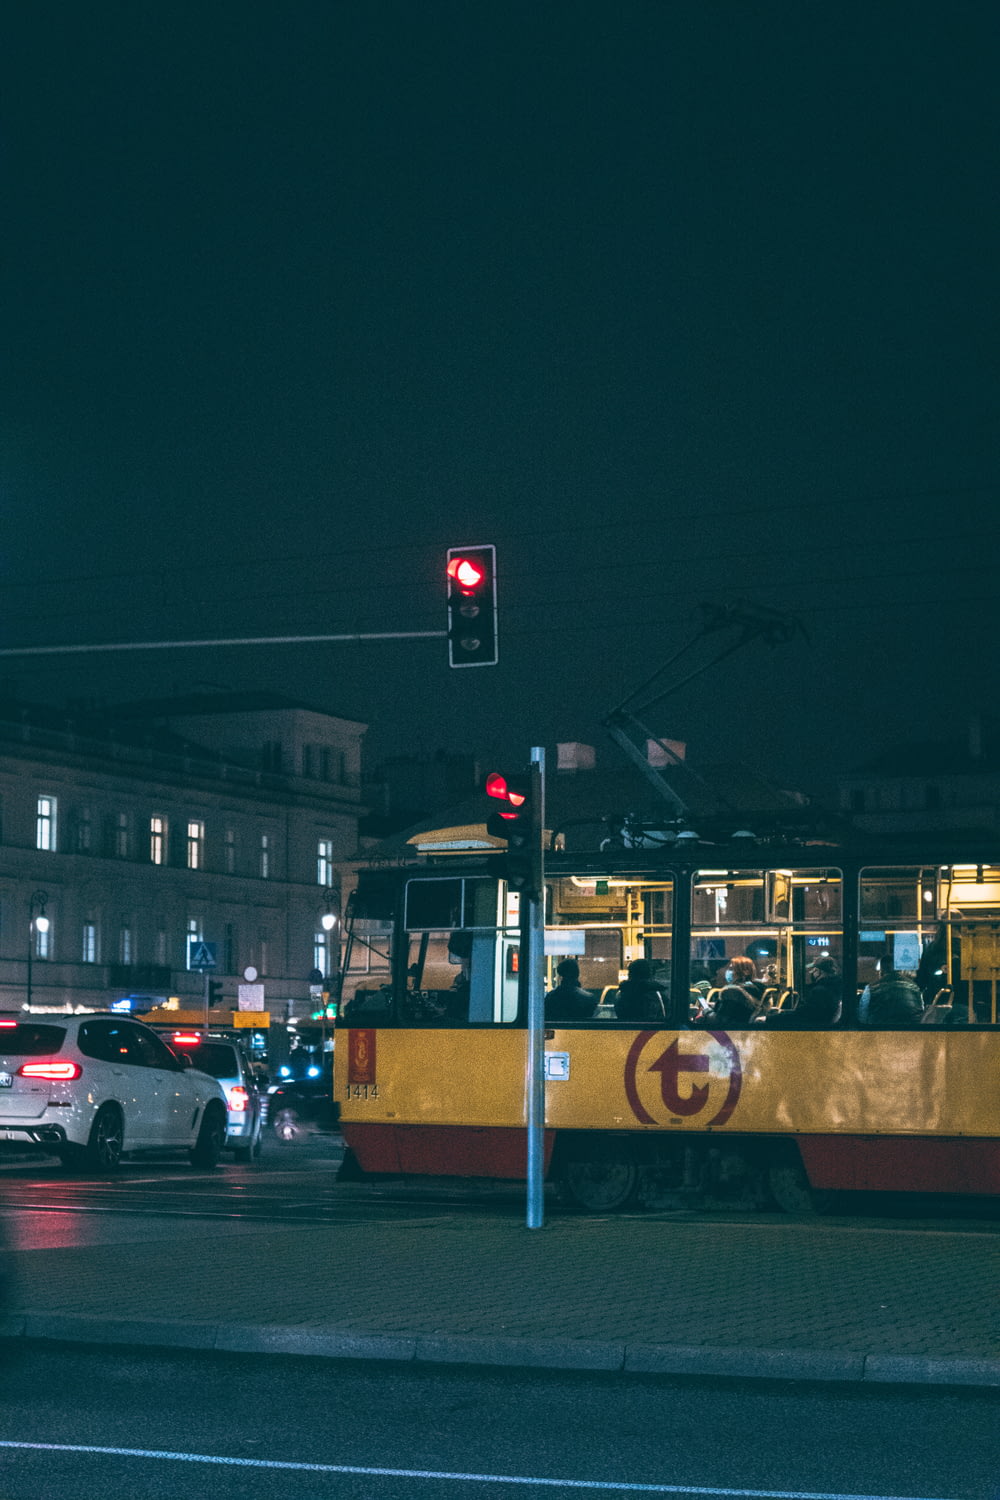 a yellow and red trolley on a city street at night